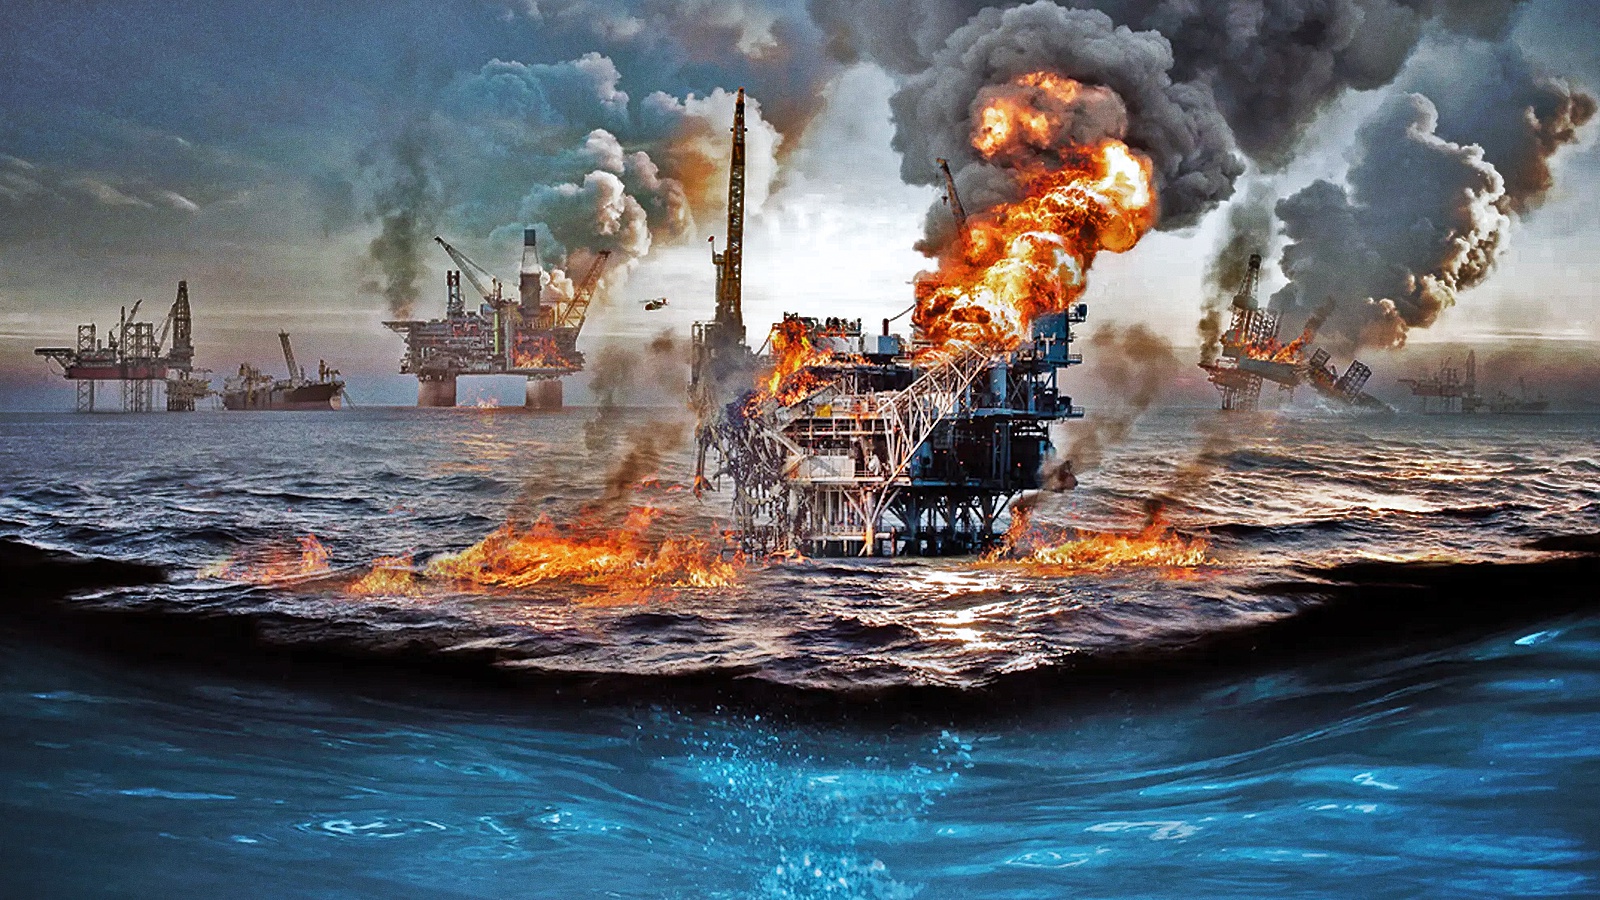 The North Sea, the review: a gripping disaster movie